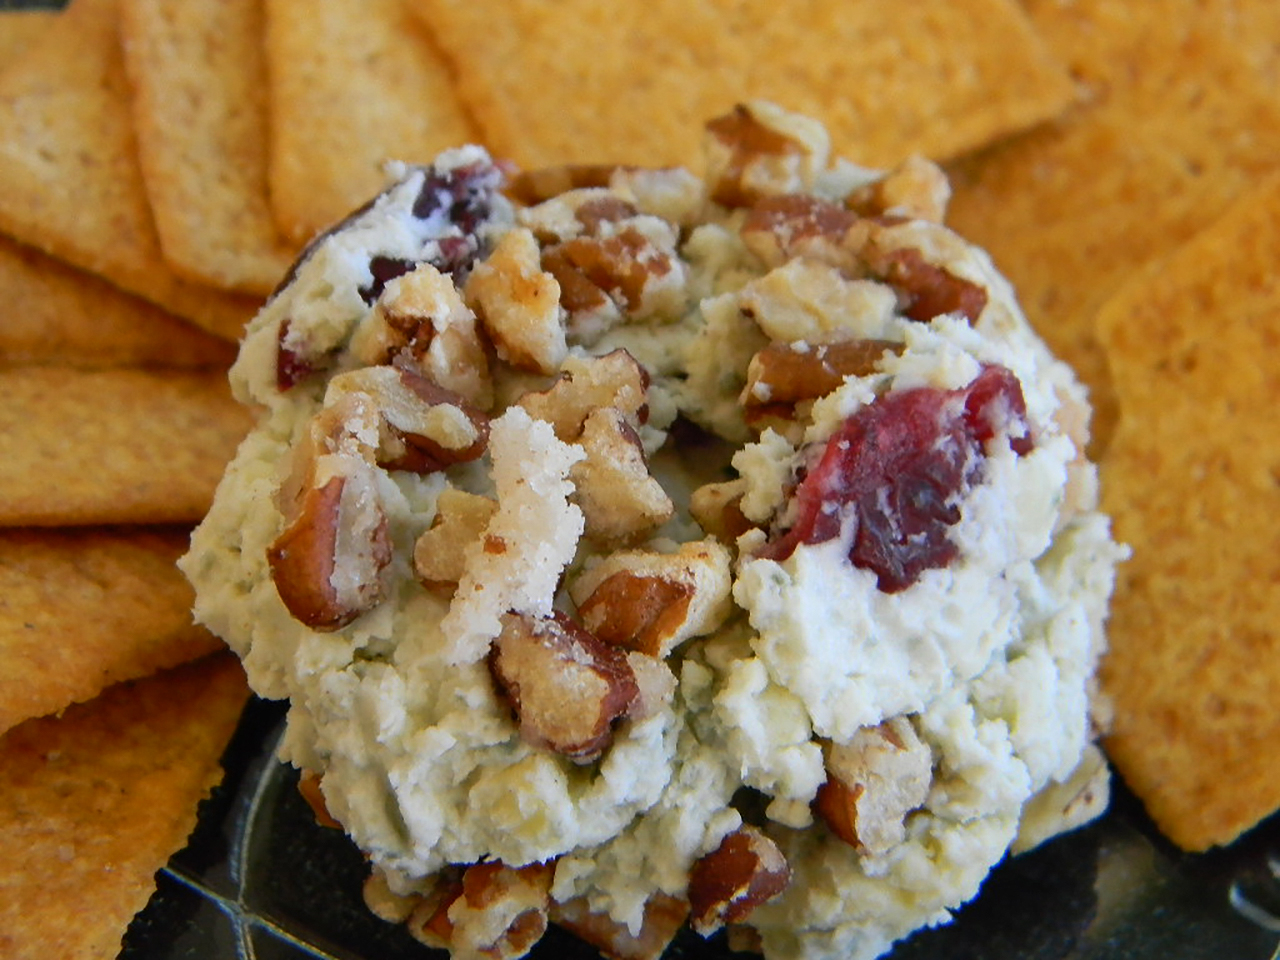 Blue Cheese, Sweet Pecan, and Cranberry Spread